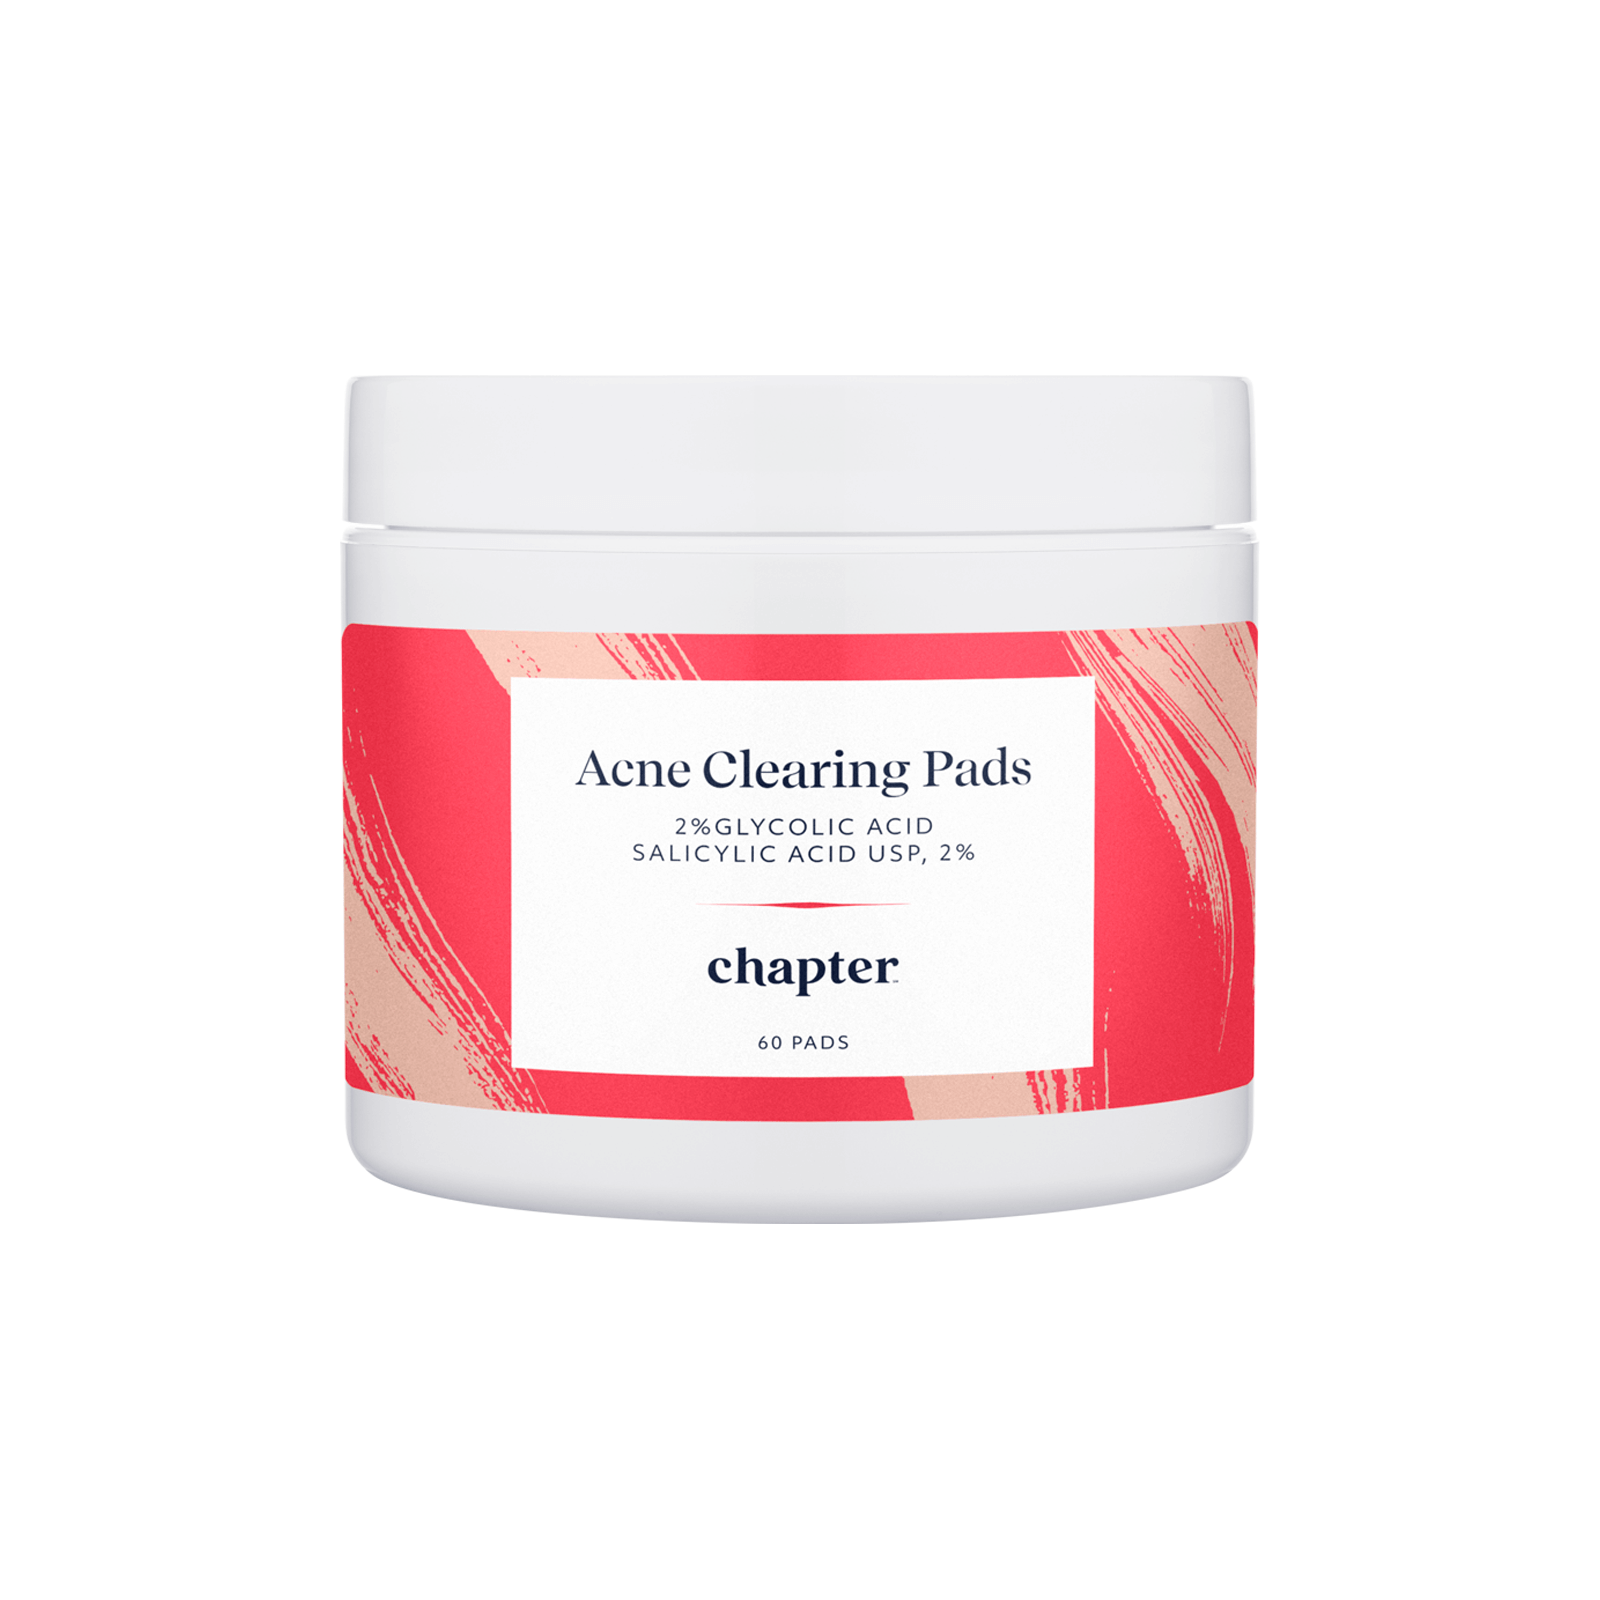 Acne Clearing Pads – (2/2)